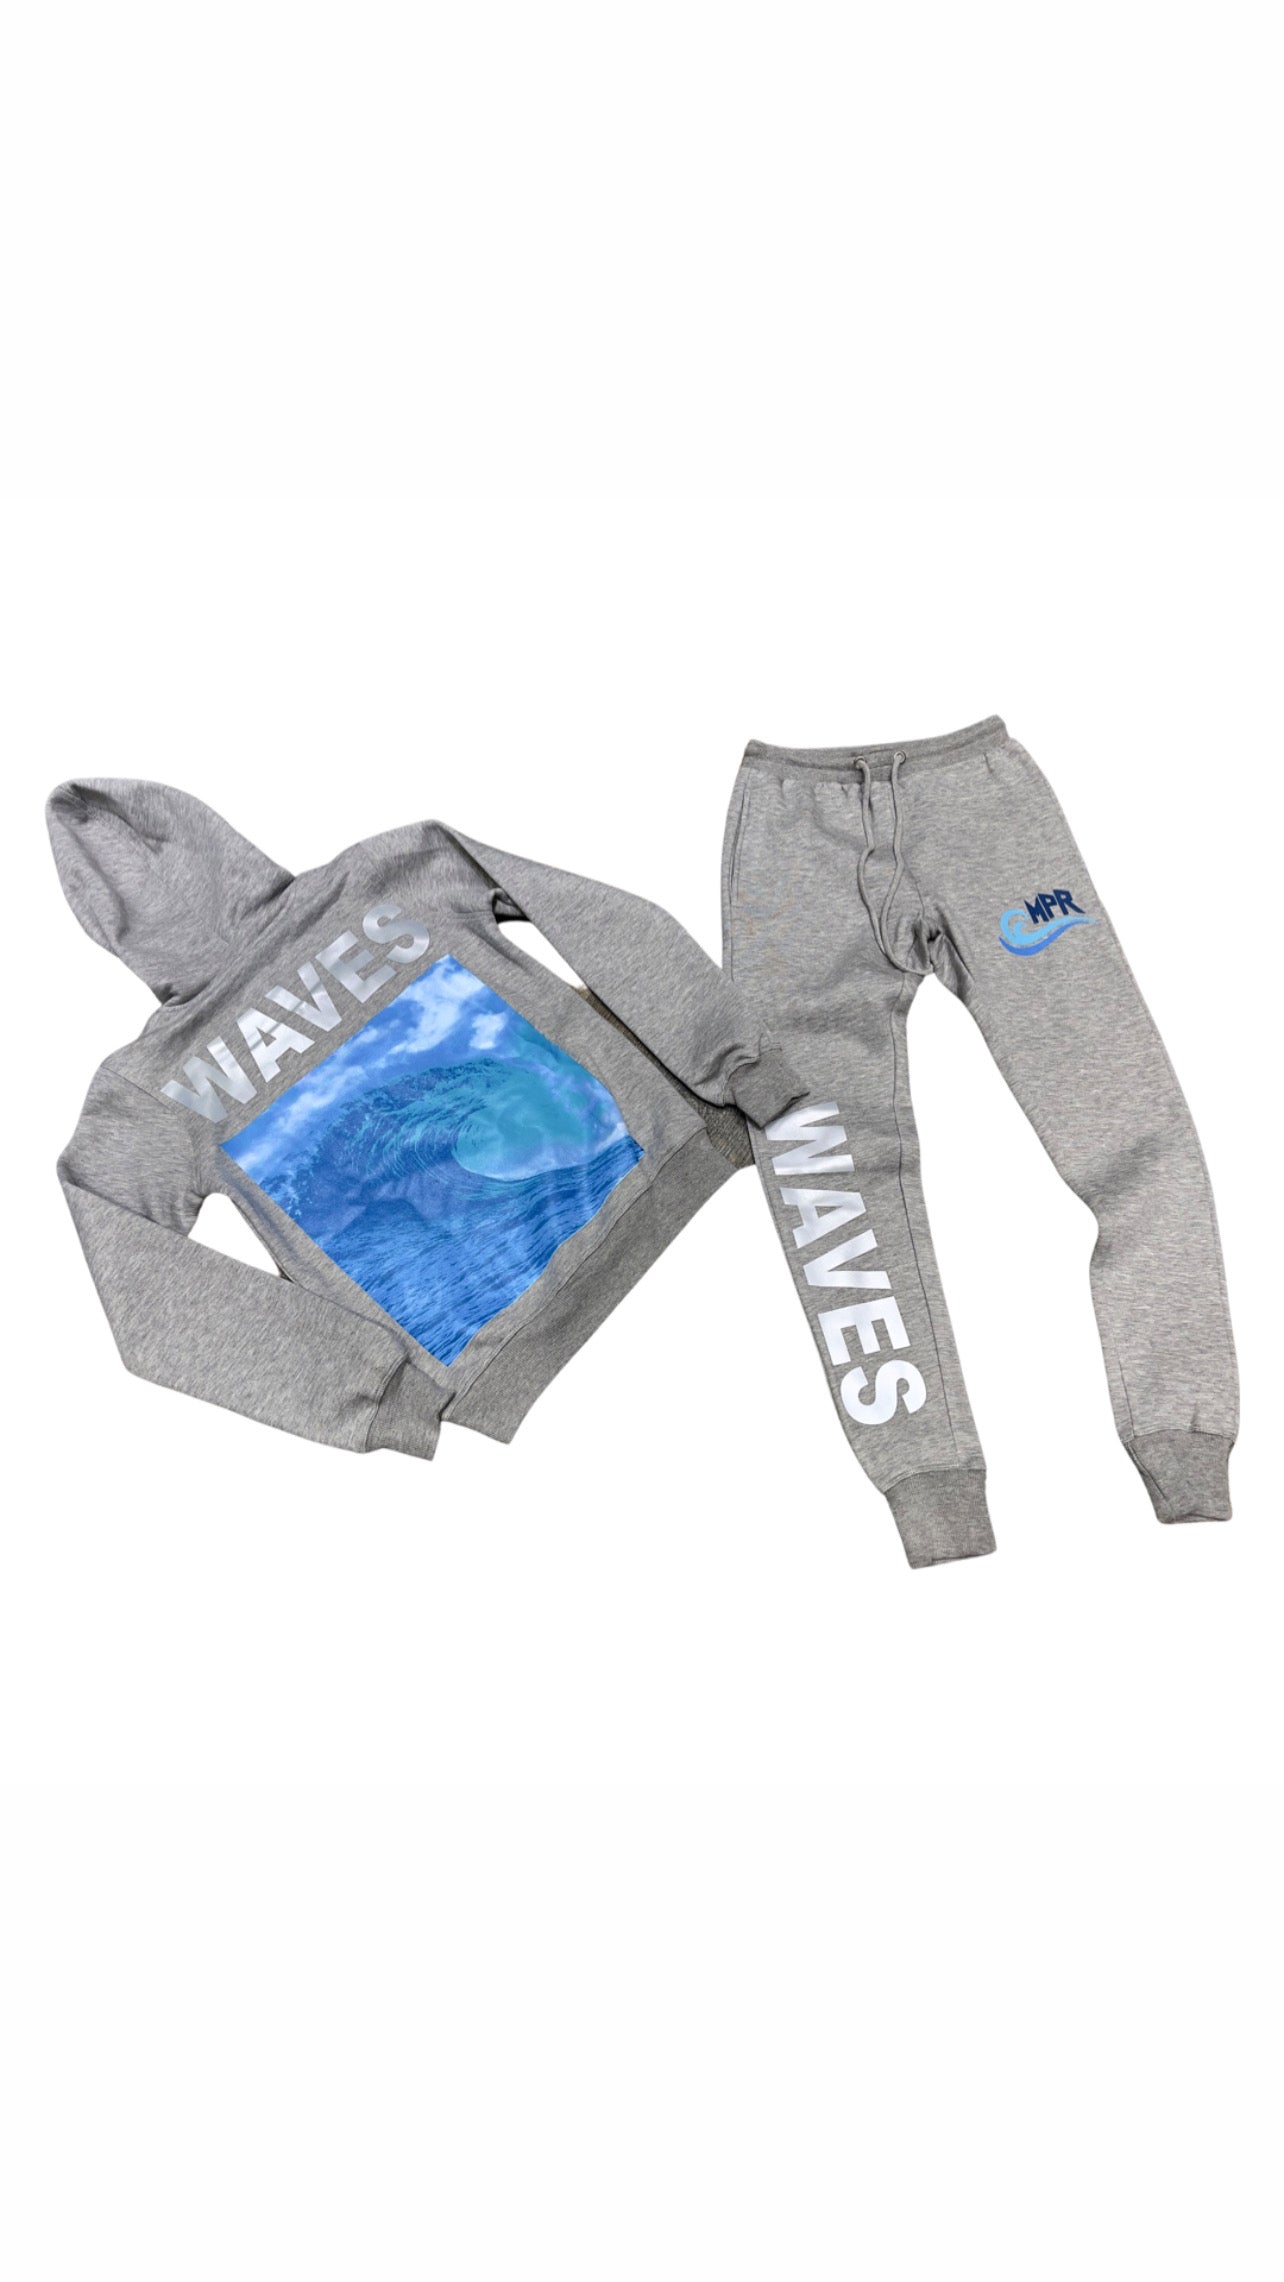 MPR CLOTHING GREY 3M Ride THE WAVE Sweatsuit.